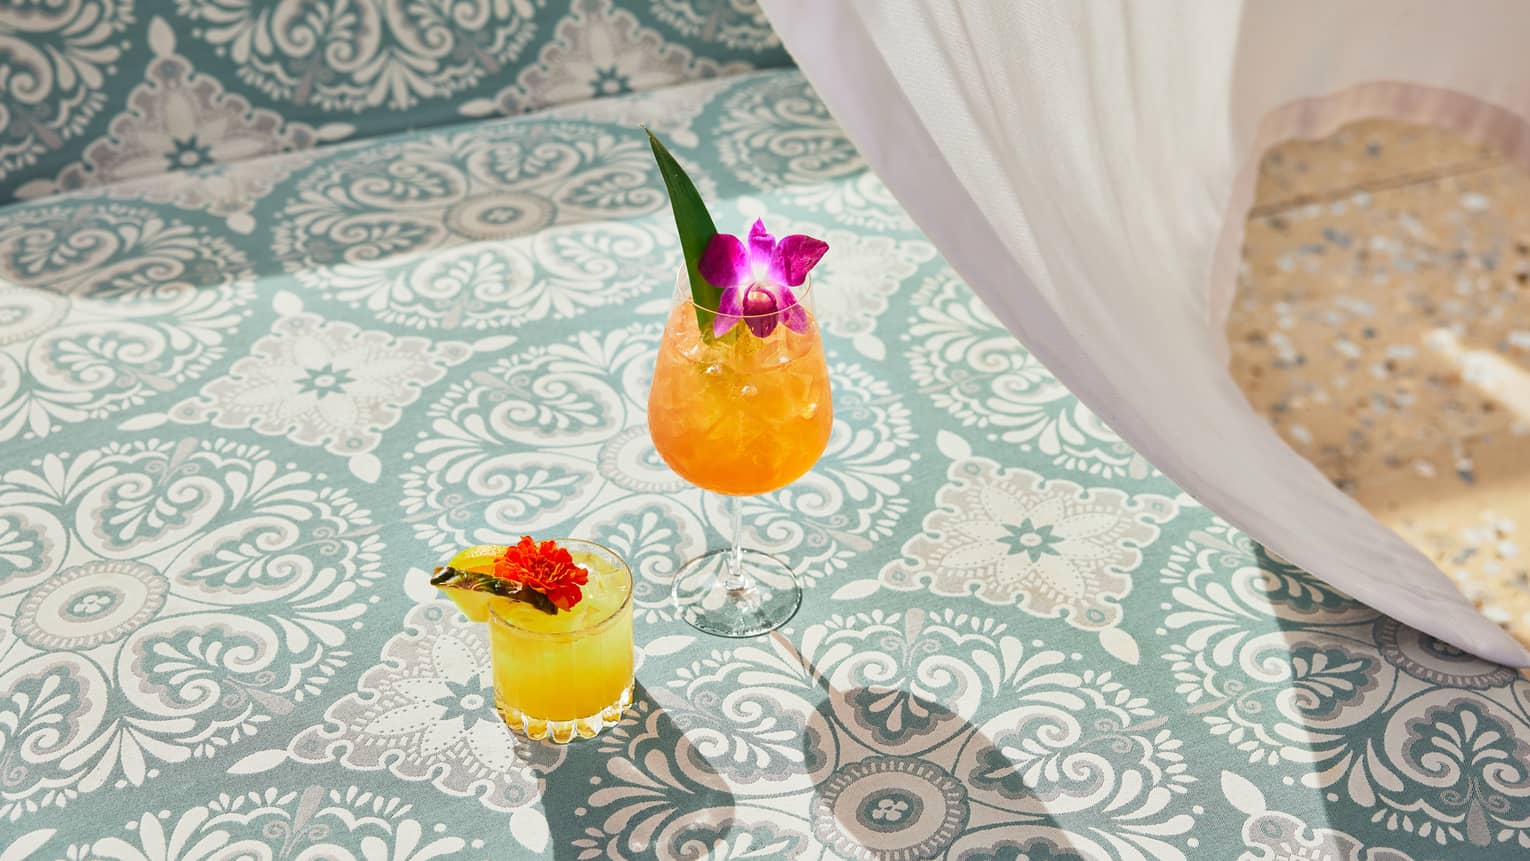 An orange and yellow cocktail on patterned tile.